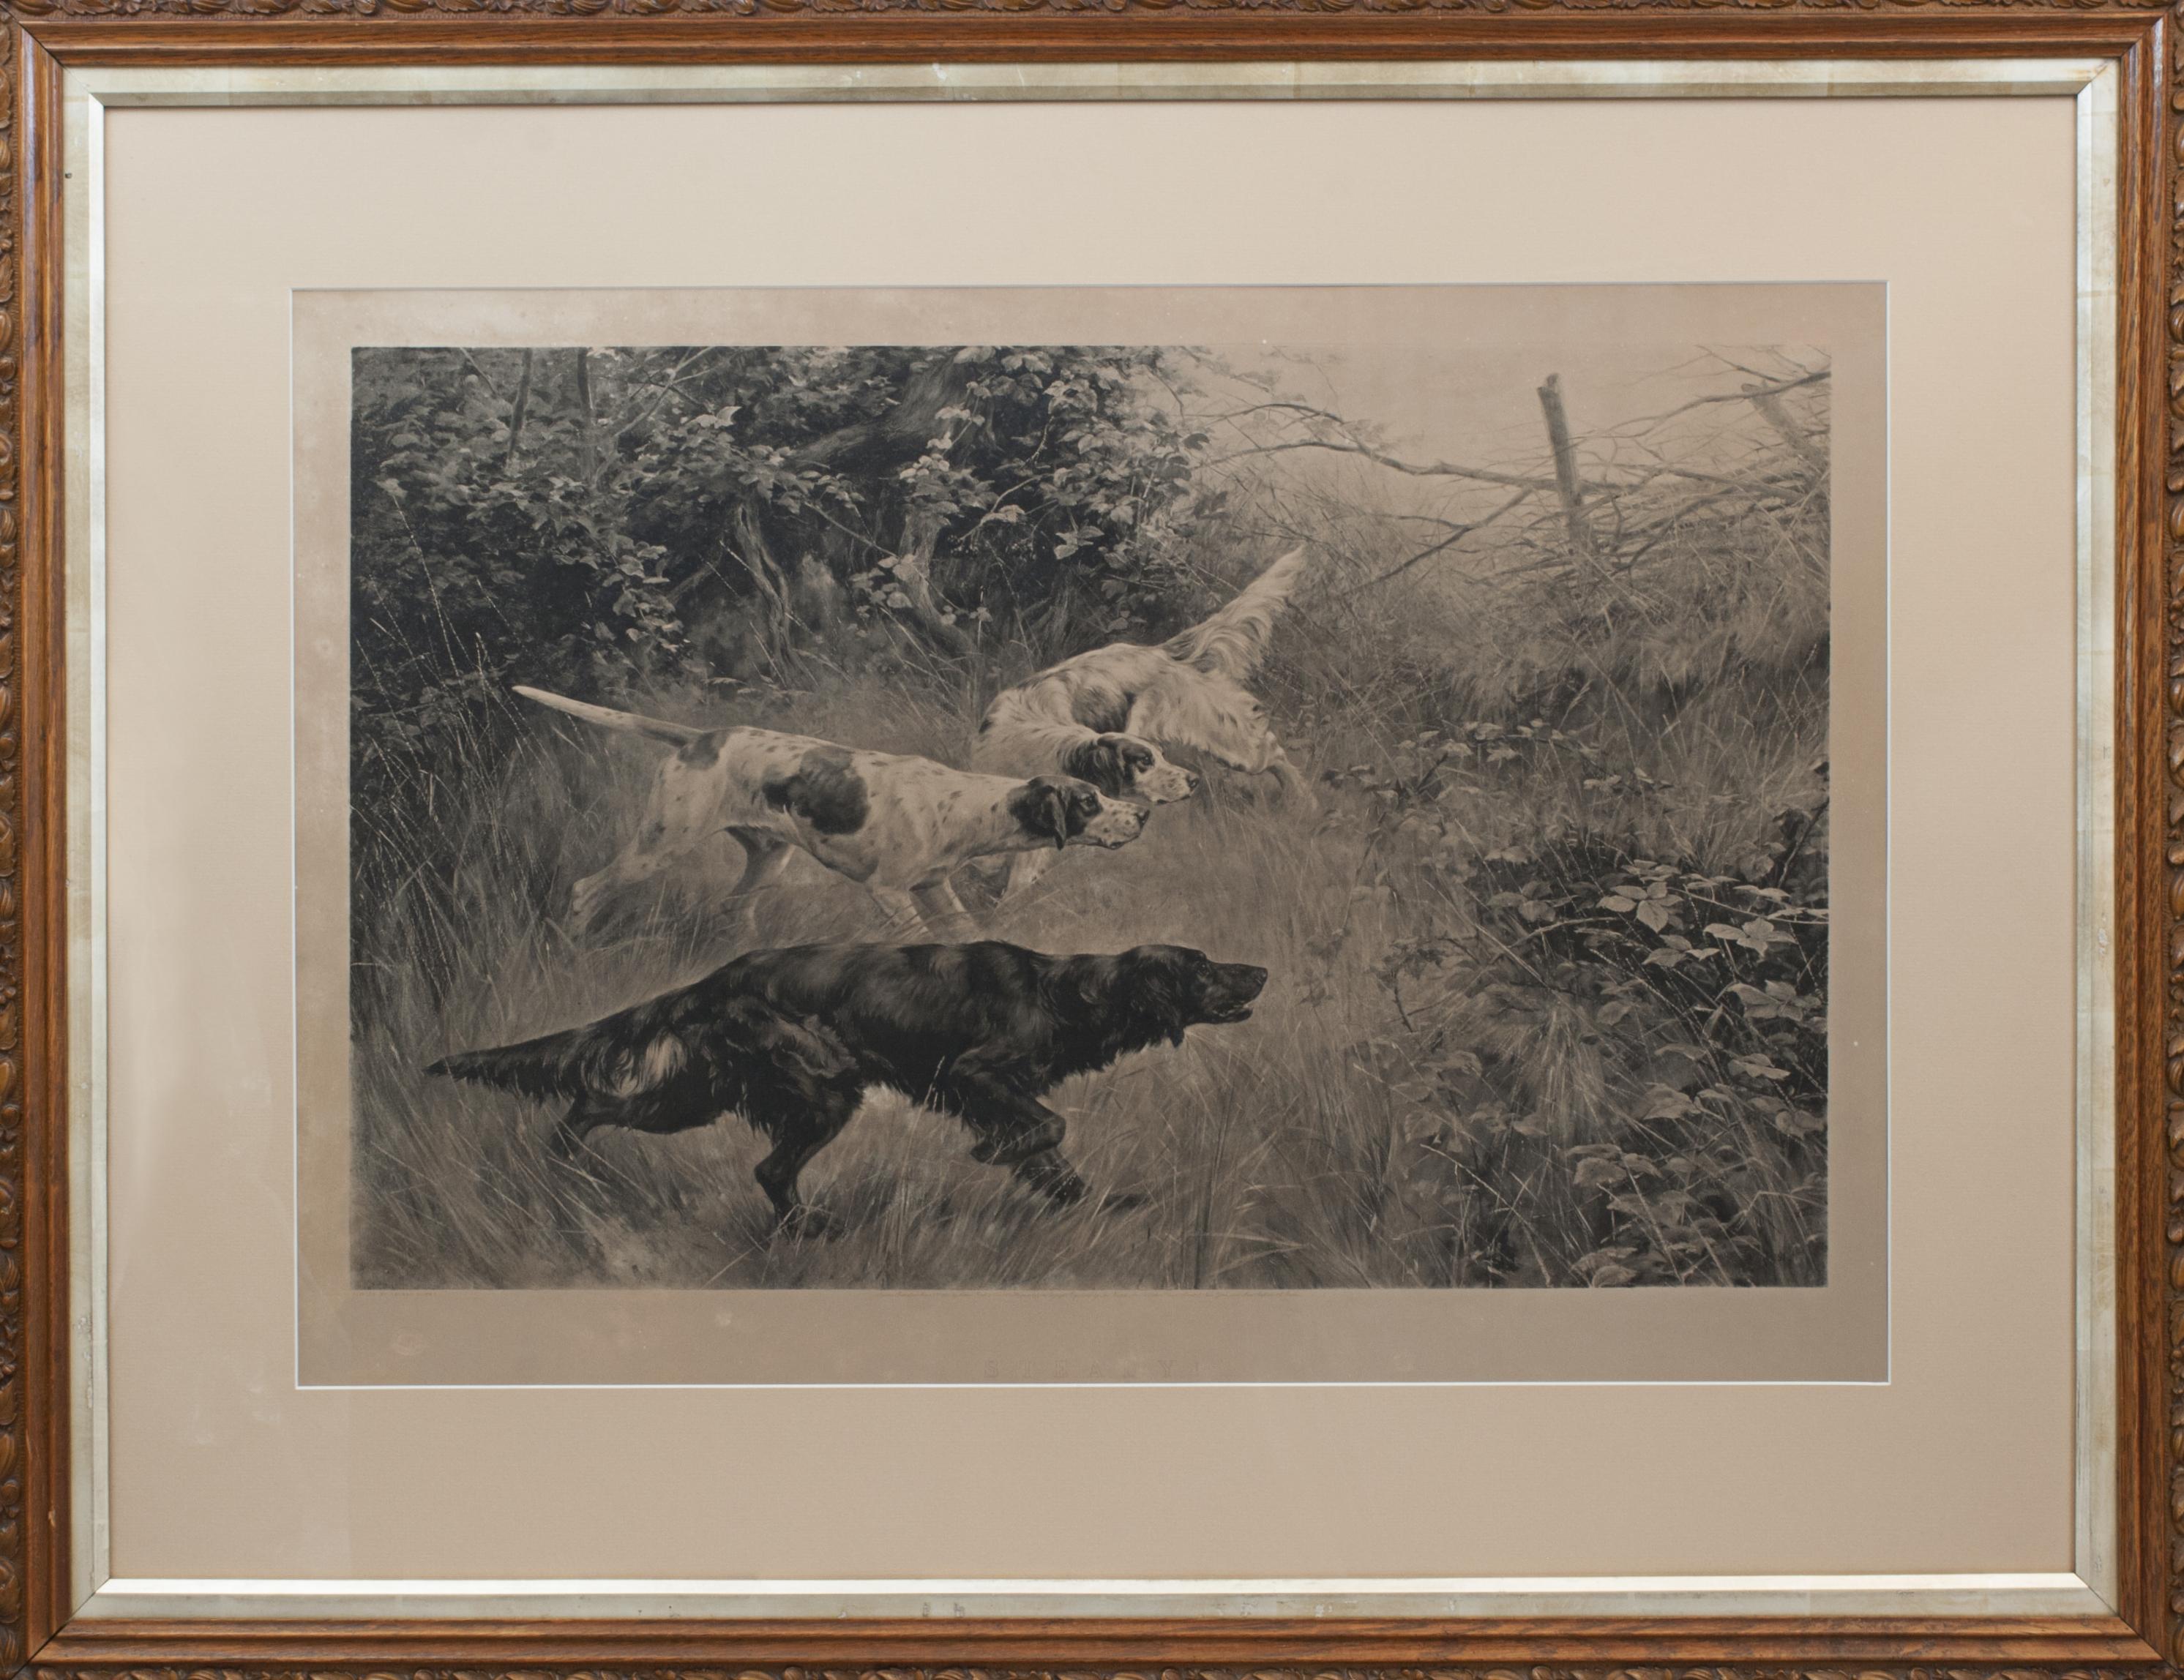 Sporting Print Of Setters. A Thomas Blinks Photogravure, Steady!
A wonderful large photogravure after Thomas Blinks original painting. Framed in original carved oak frame with gold slip. Steady! is a wonderful photogravure of three setters flushing